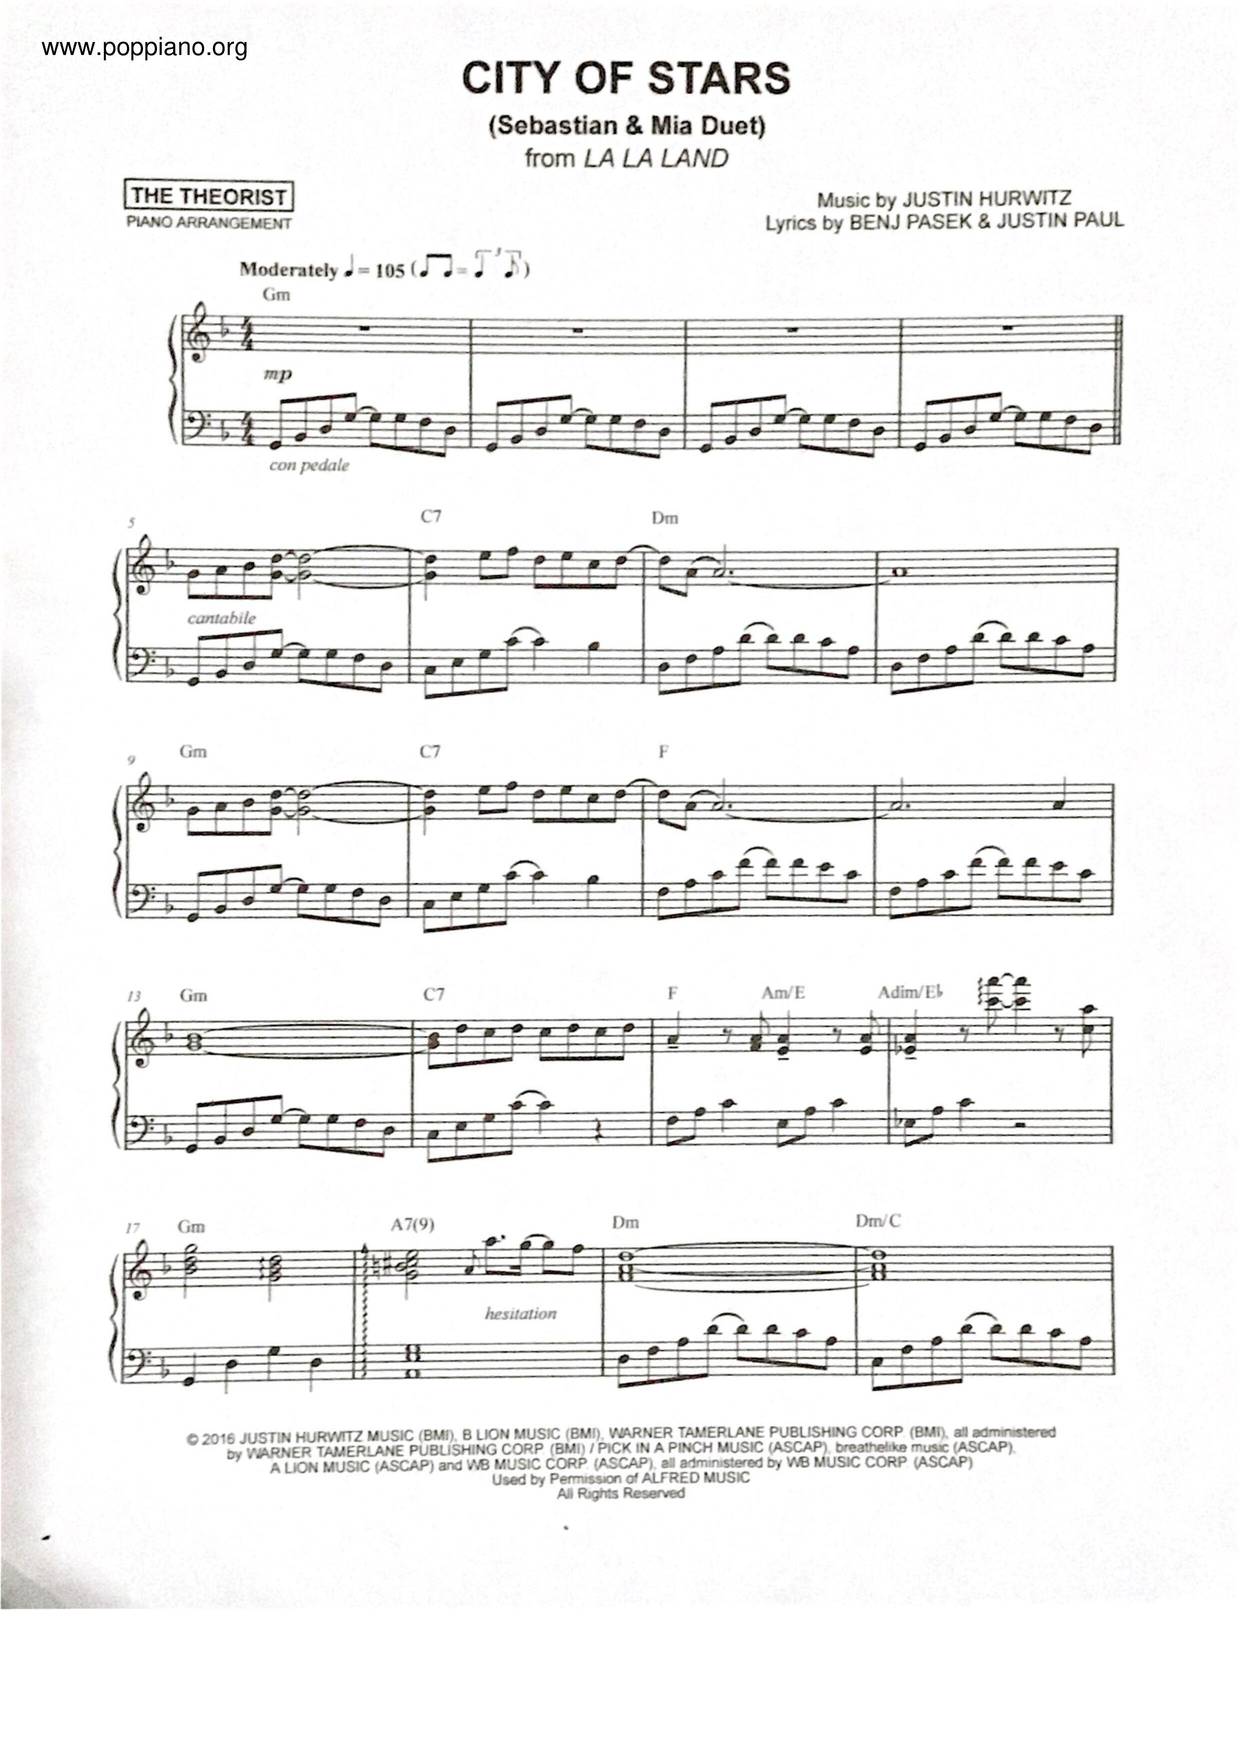 The Piano Keys City of Stars Sheet Music (Piano Solo) in D Minor -  Download & Print - SKU: MN0193510